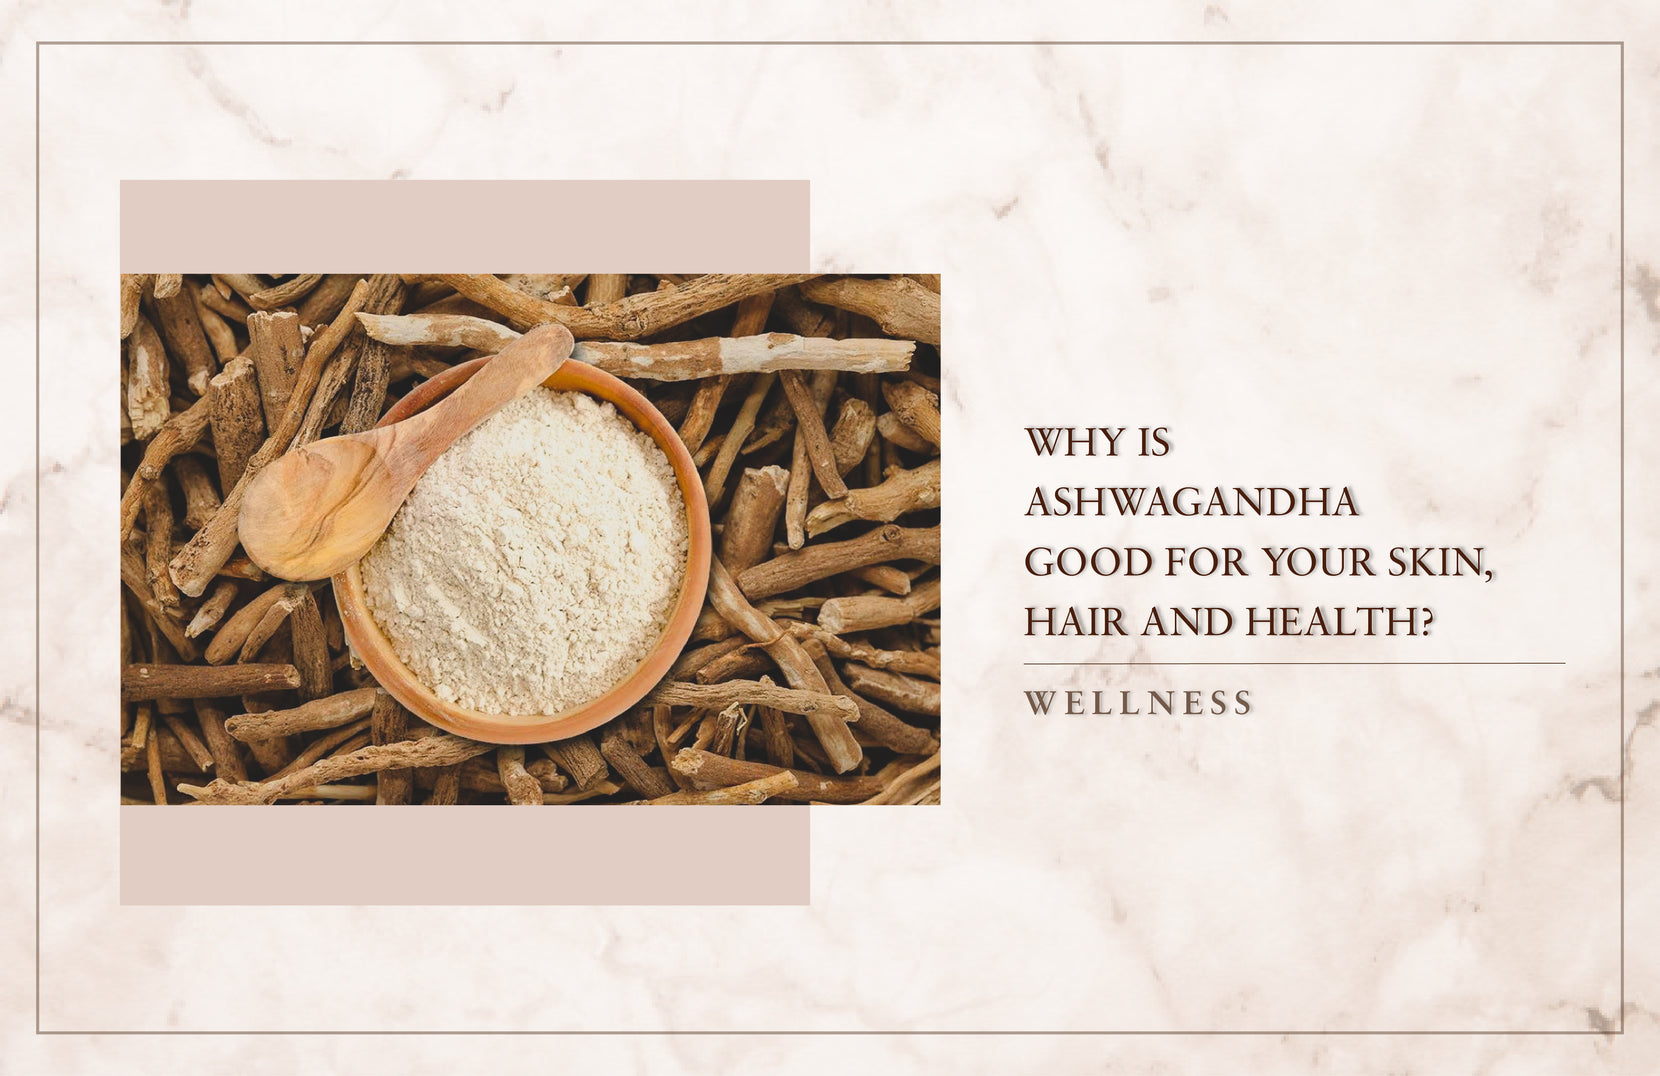 Why Is Ashwagandha Good For Your Skin, Hair And Health?